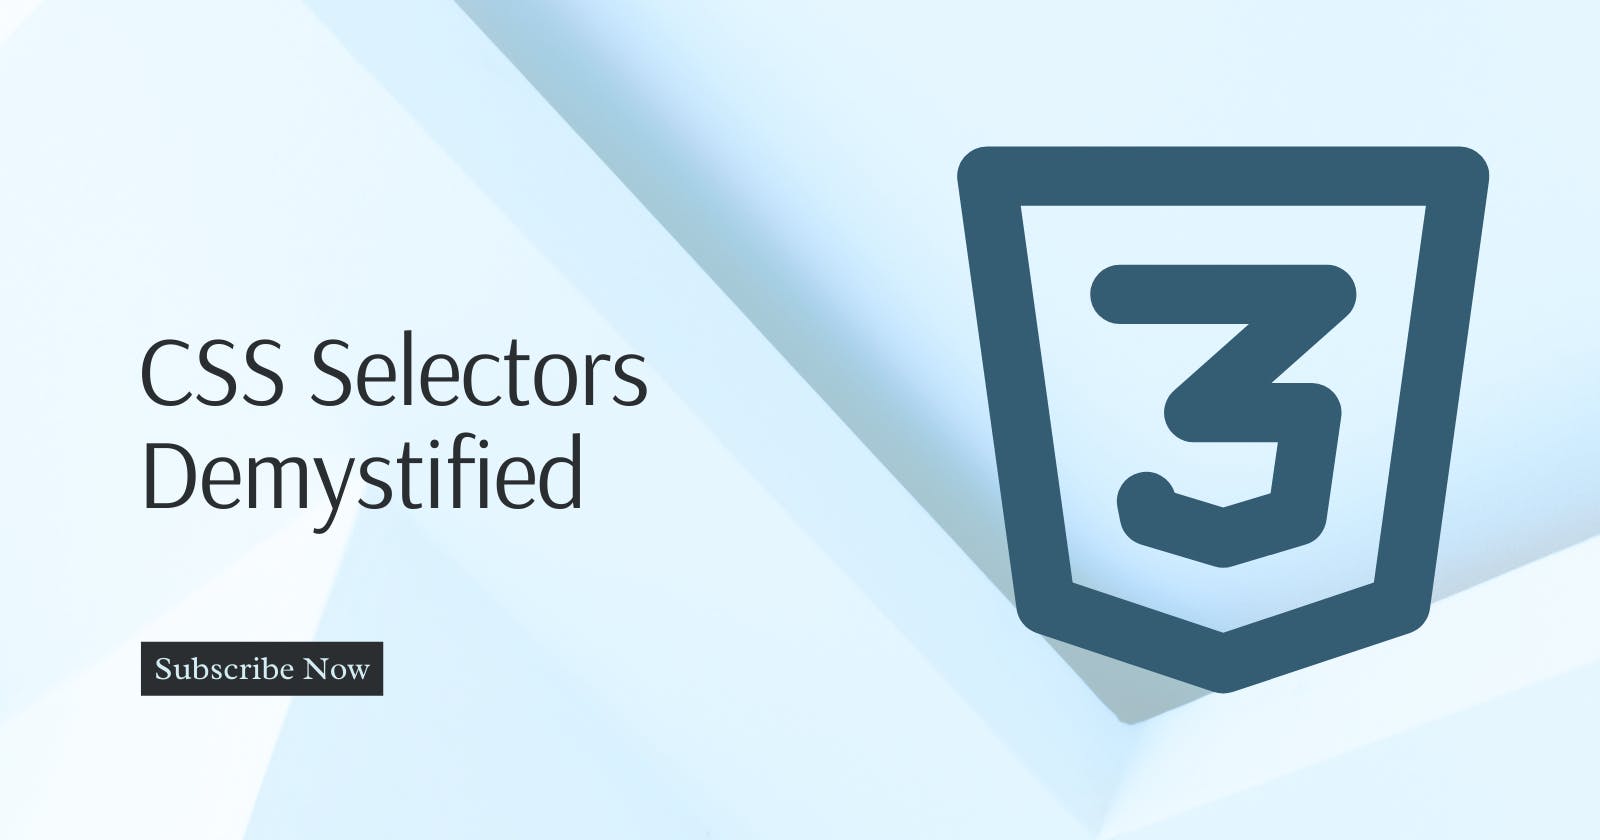 CSS Selectors Demystified: A Step-by-Step Tutorial